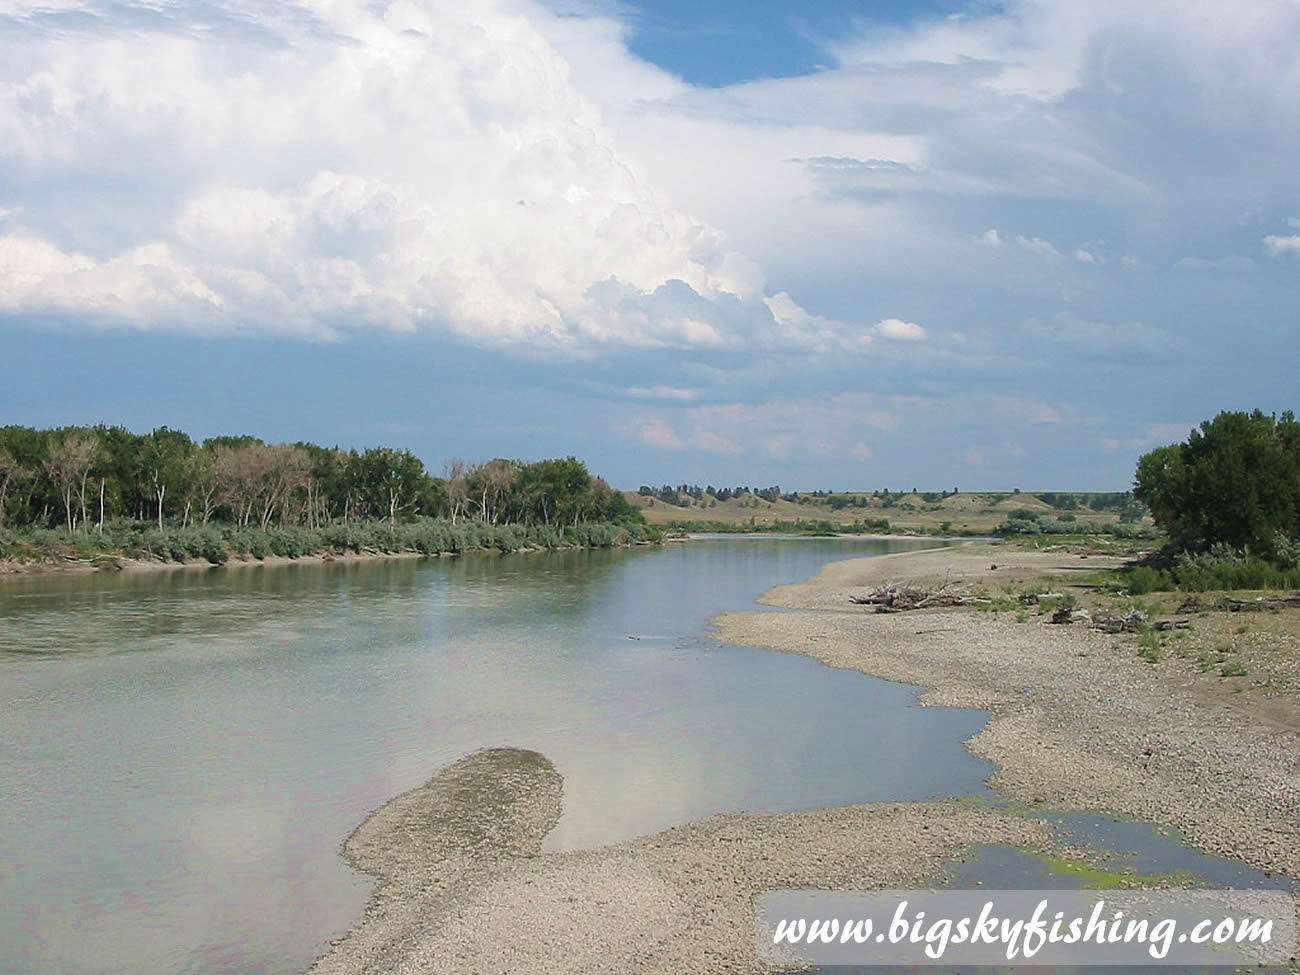 Typical Scenery of Lower Yellowstone River in Montana